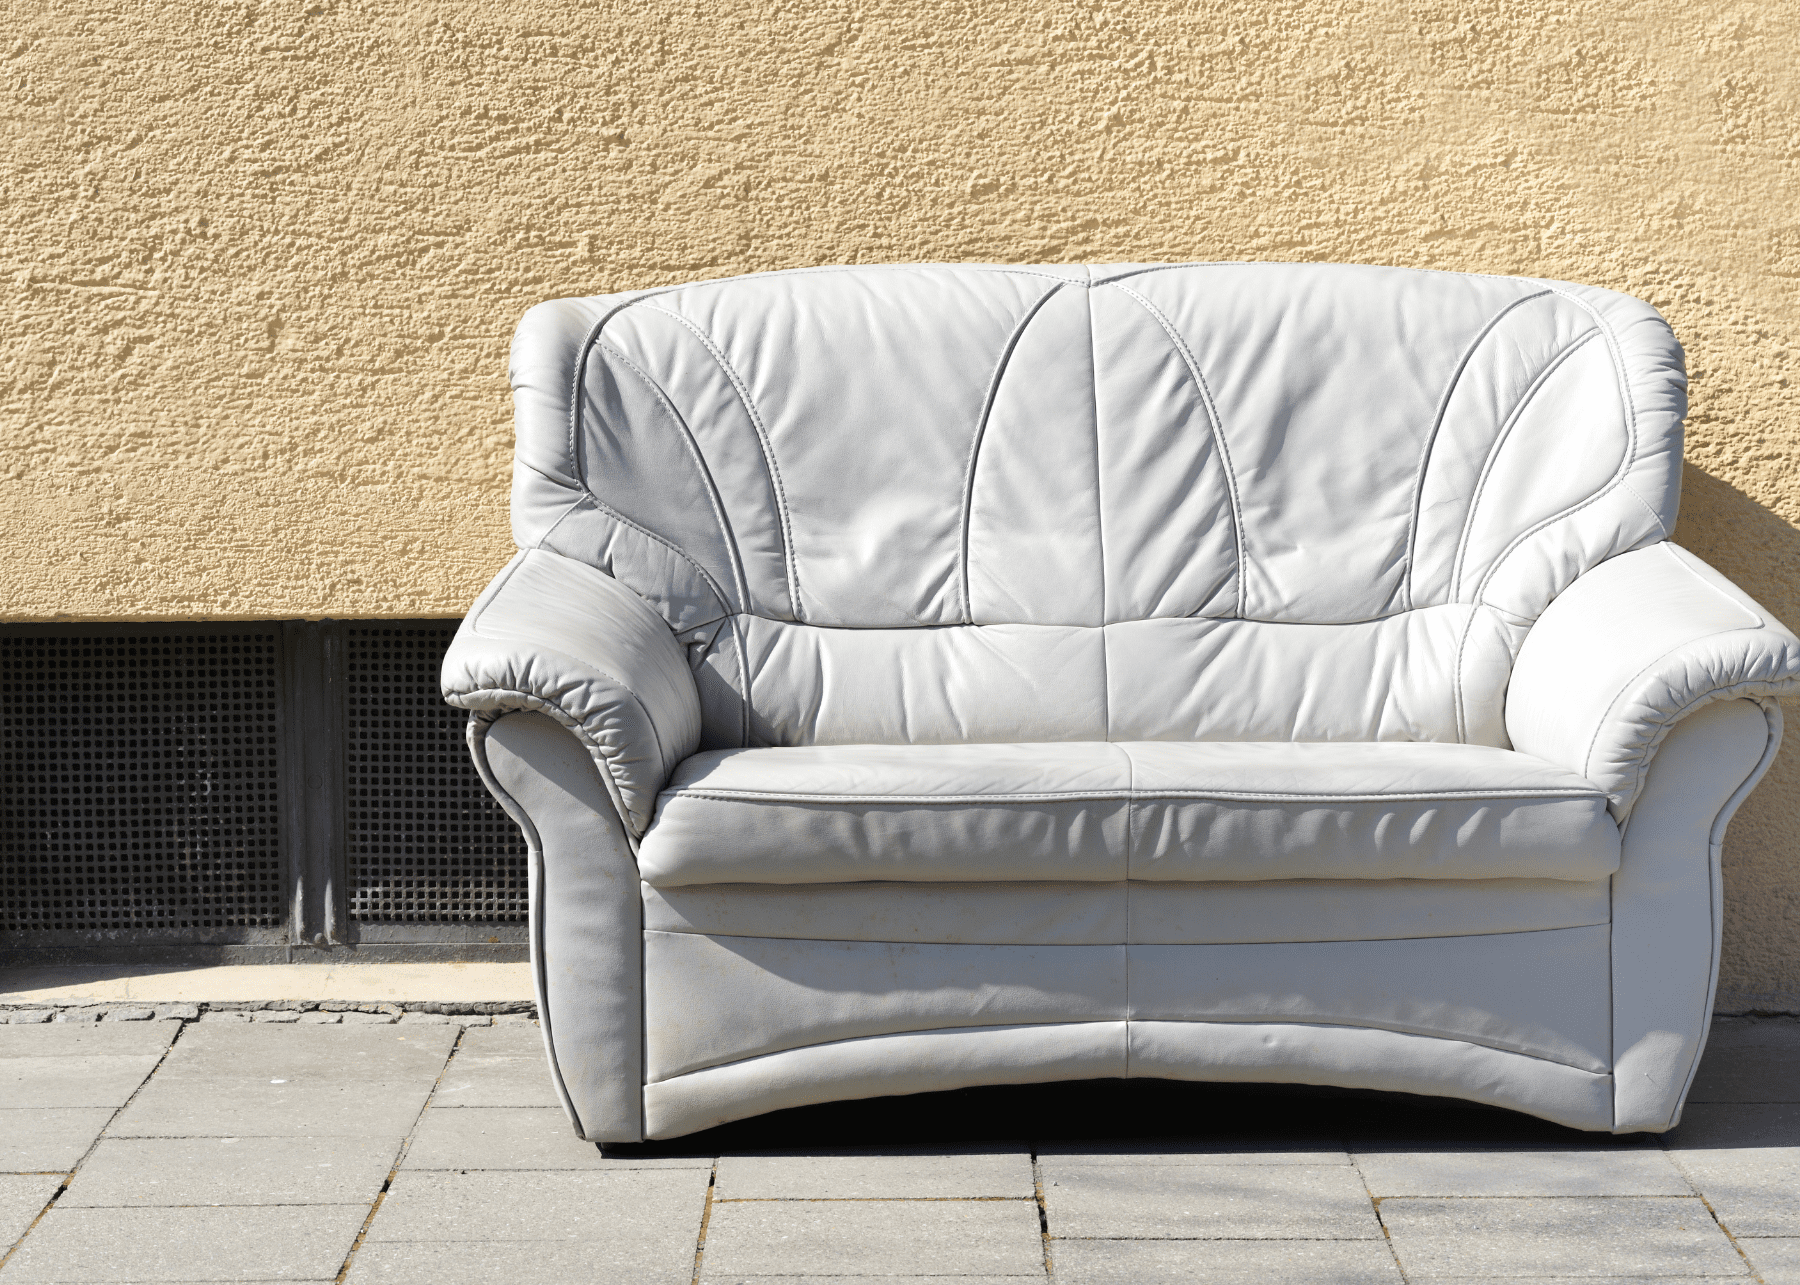 White leather couch on the side of the road against wall of building